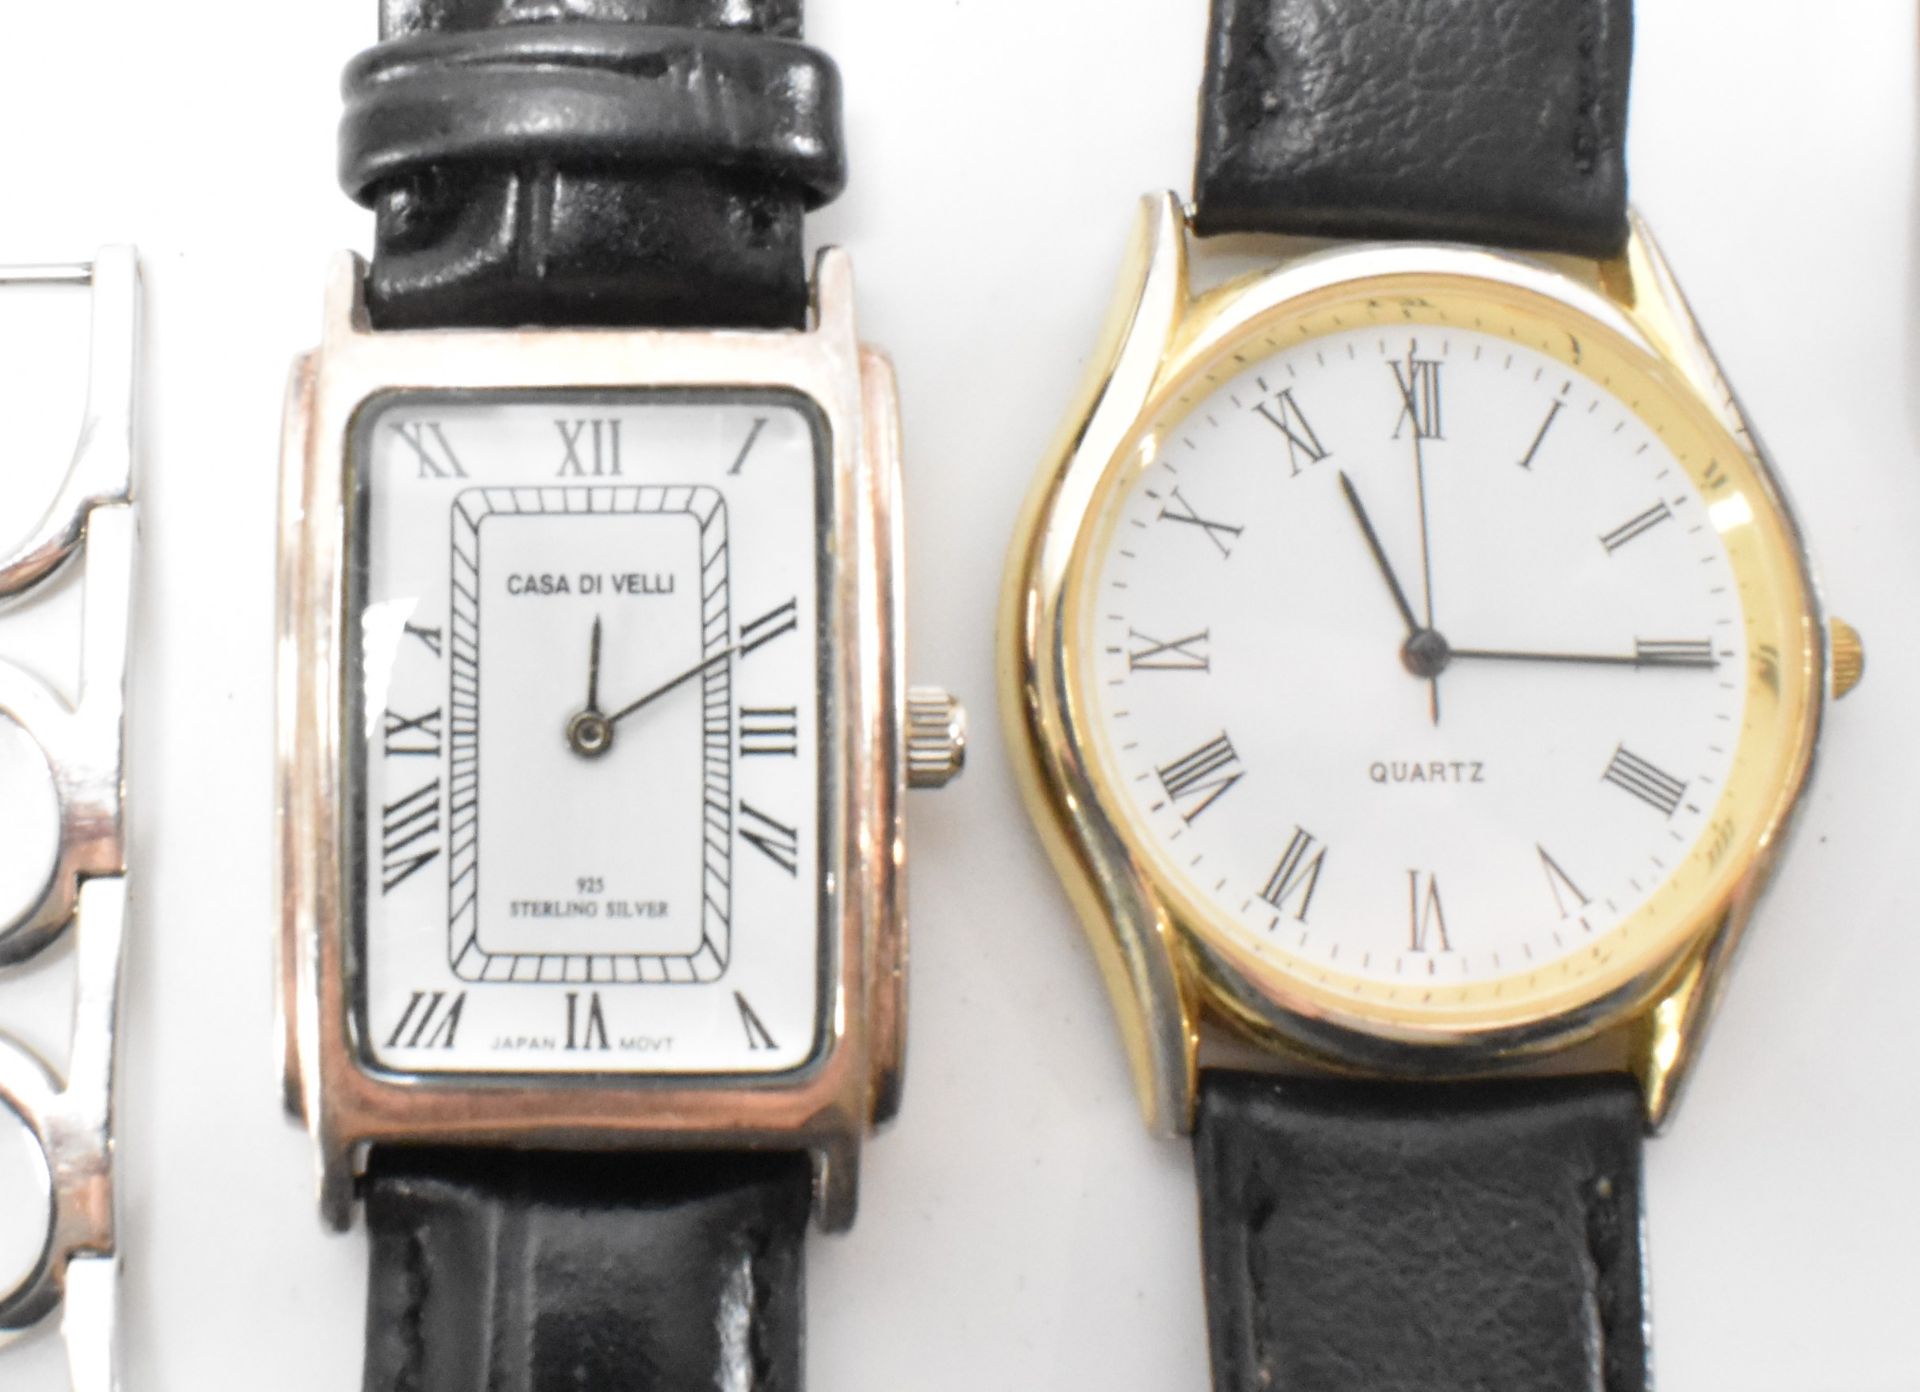 ASSORTMENT OF VARIOUS WRIST WATCHES - Image 9 of 9